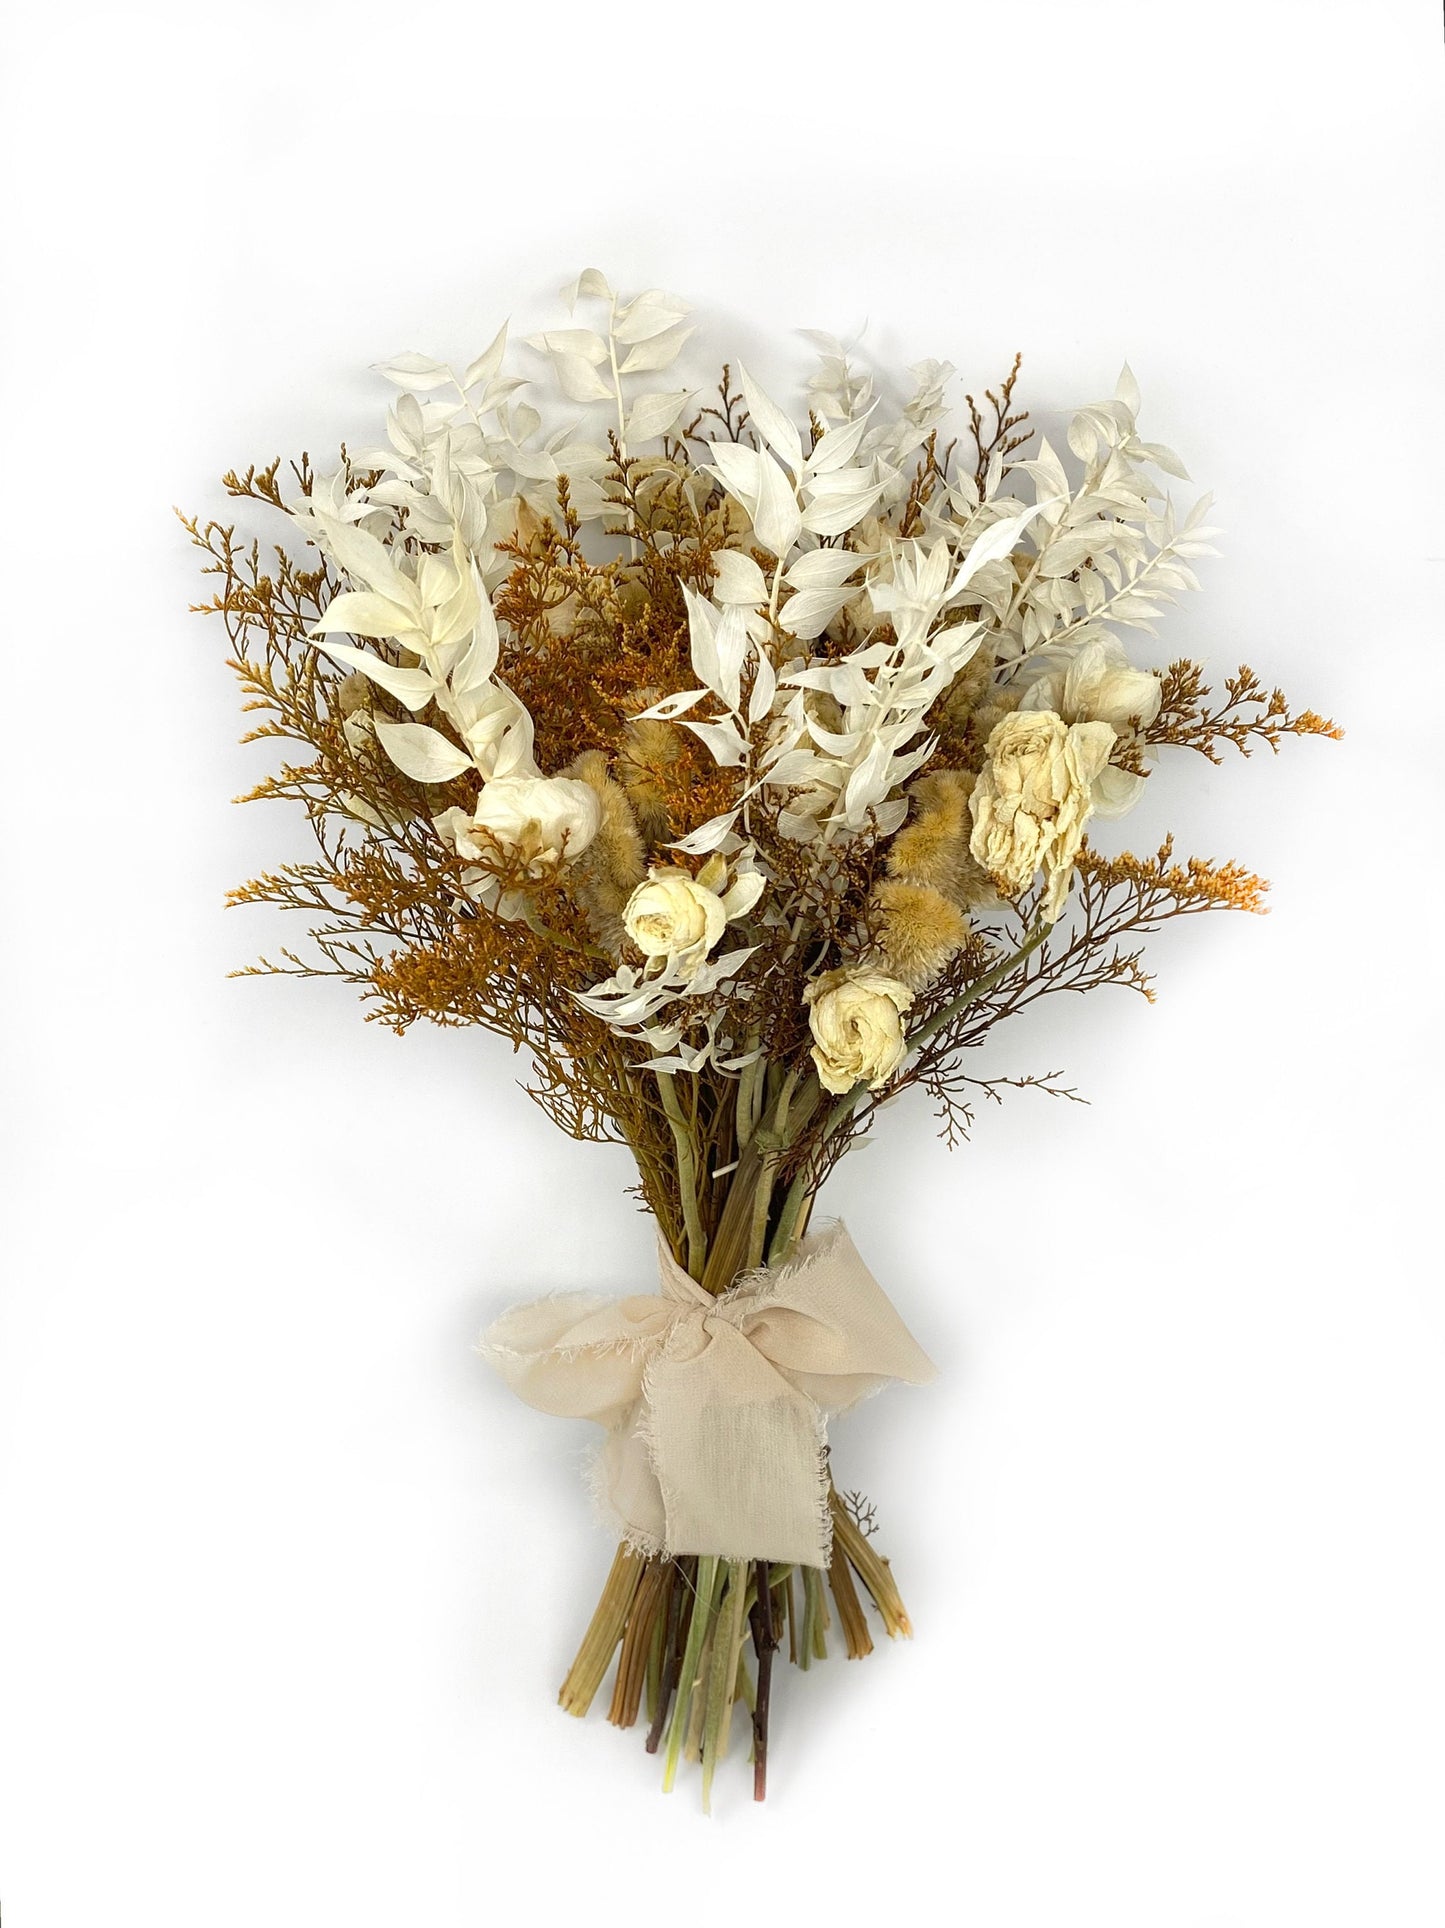 Fall Bouquet, Wedding Flowers, Floral Arrangement, Dried Flowers, Preserved, Dried Flowers, Bridal, Natural, Orange and White , Home Decor